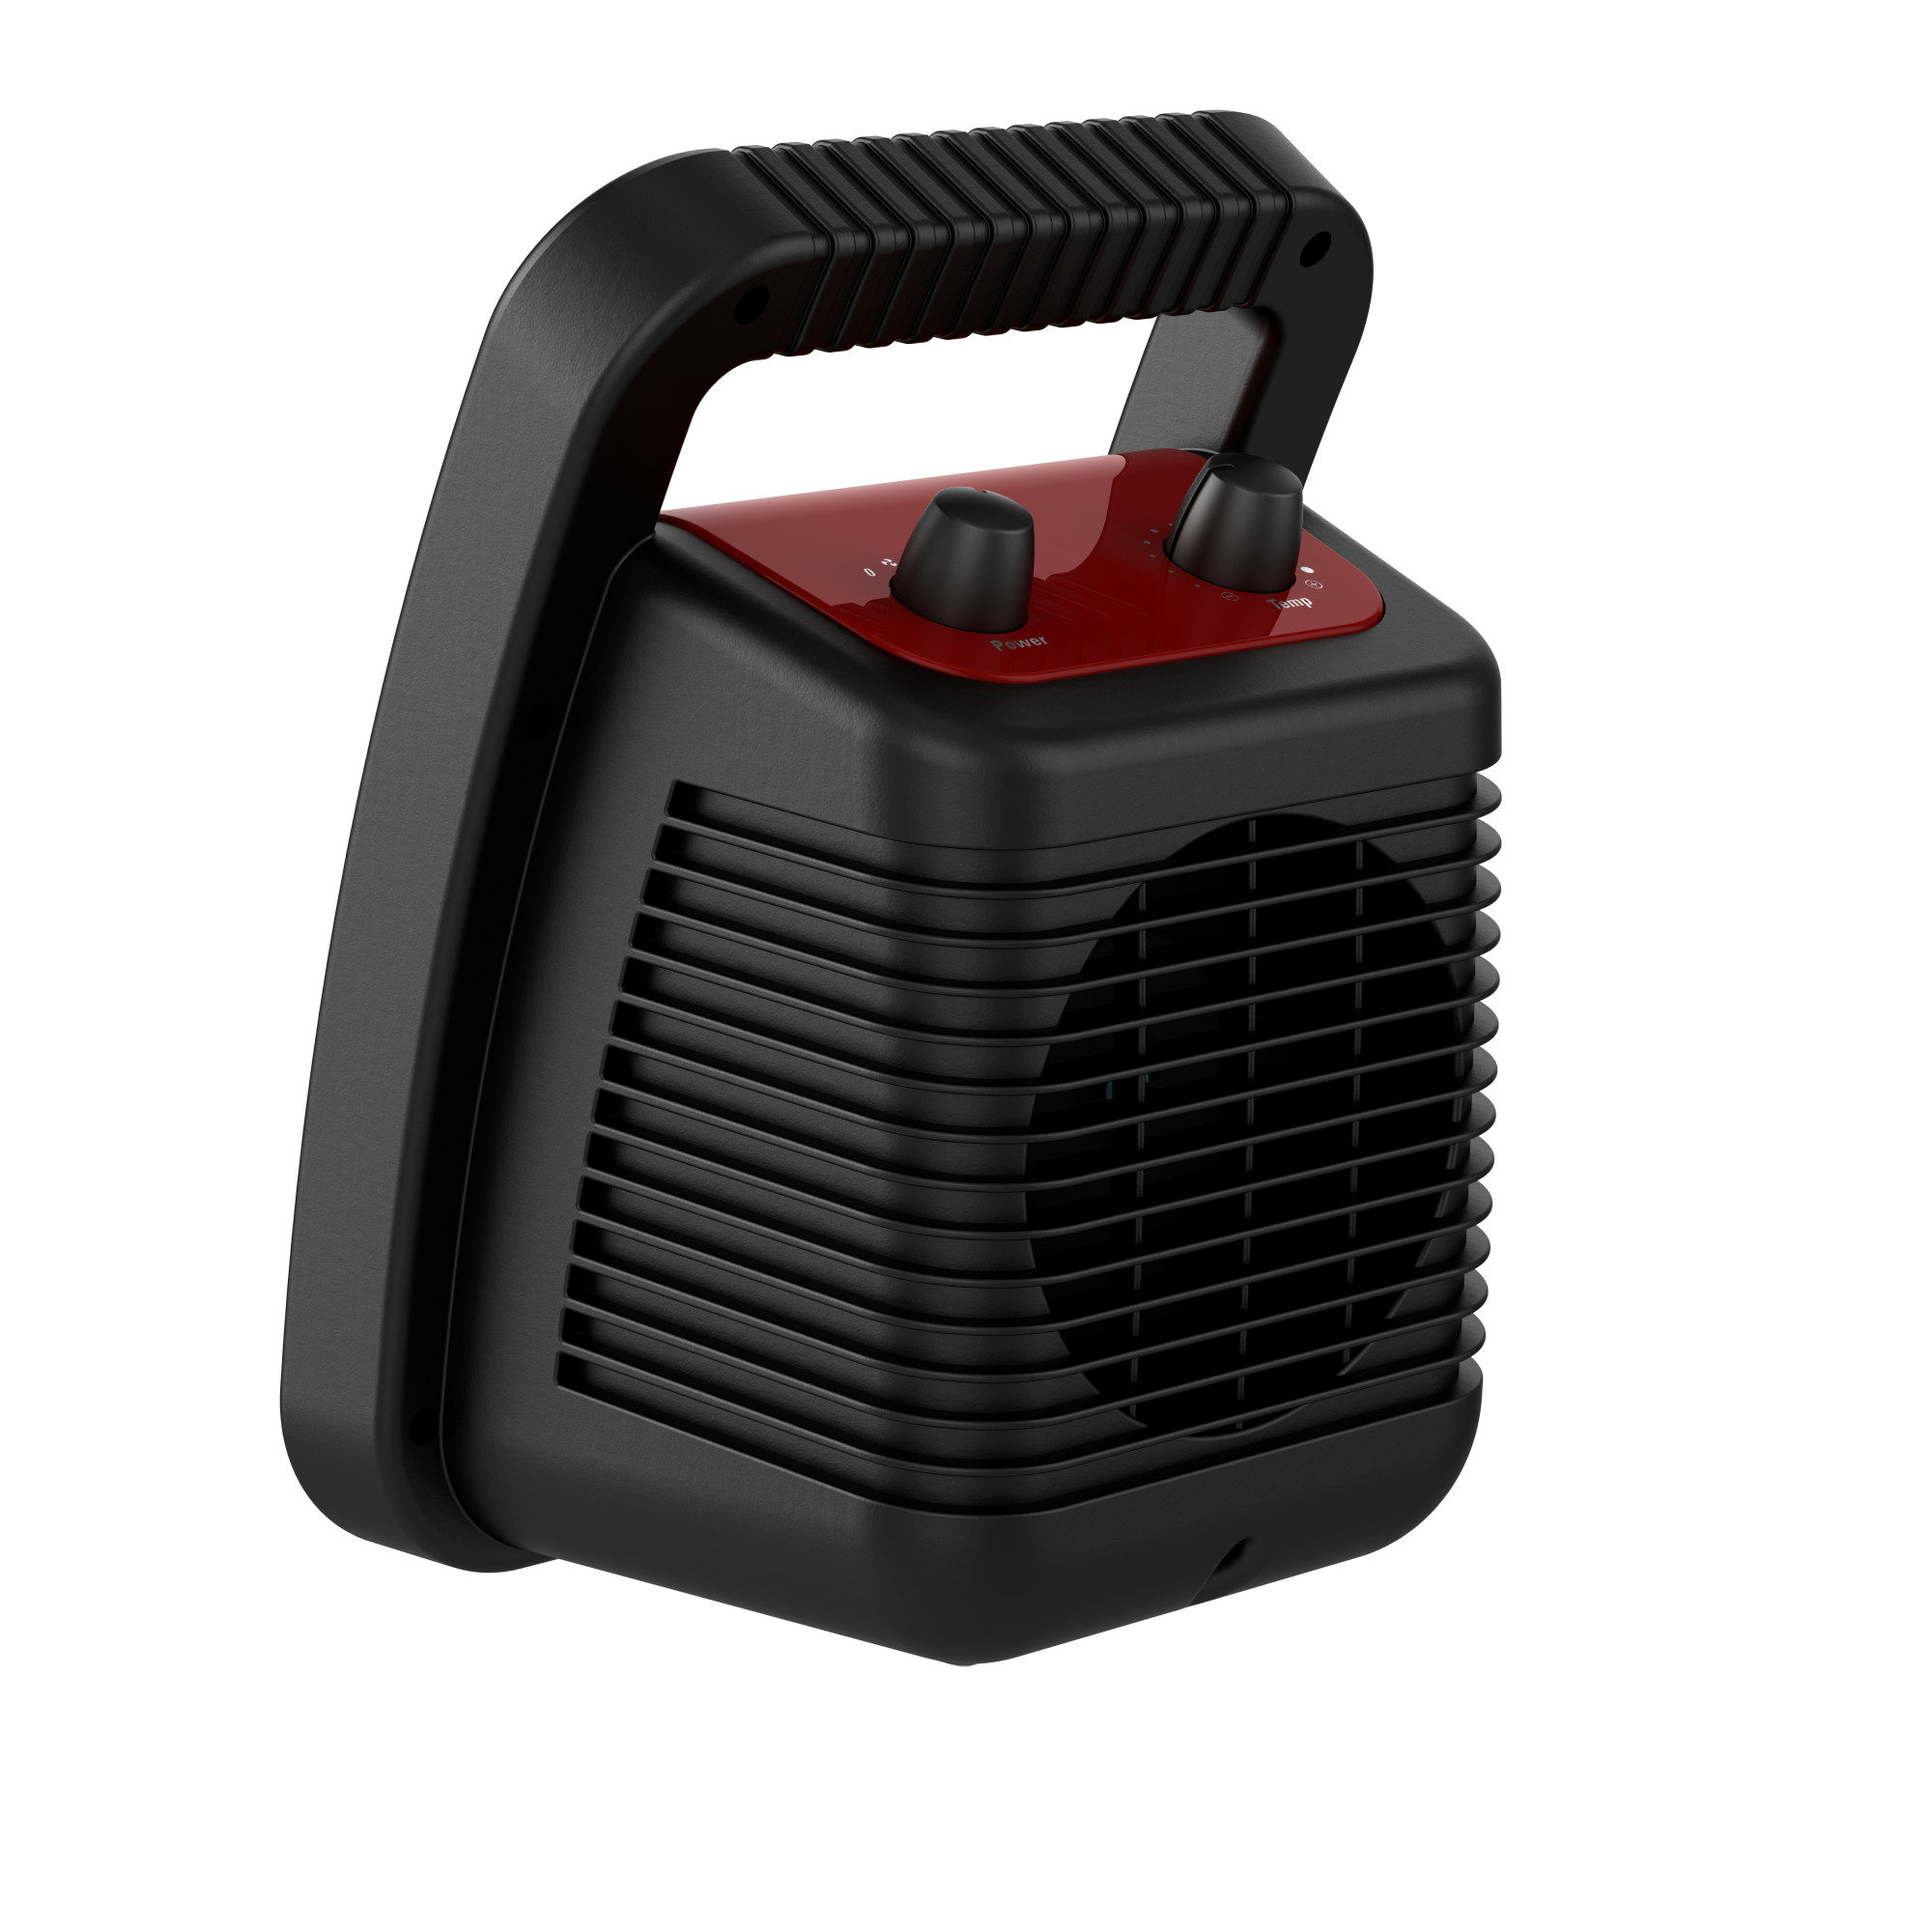 Lasko 12" Utility Ceramic Heater with Adjustable Thermostat, Black/Red, CU12110, New - image 4 of 5